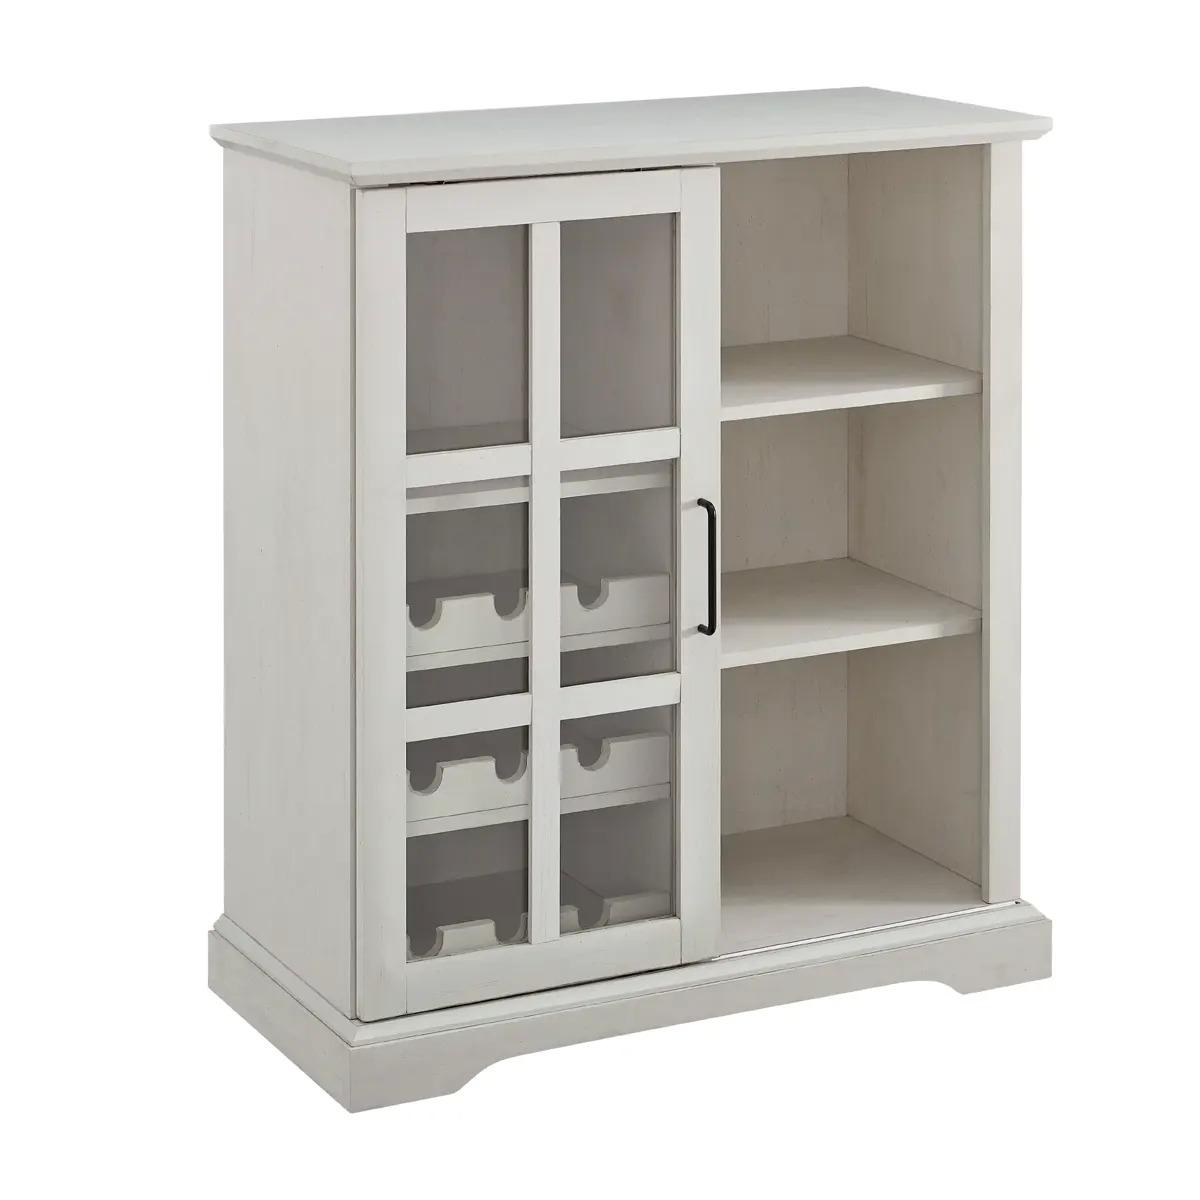 Birch Harbor Lewes Sliding Glass Door Bar Cabinet for $70 Shipped